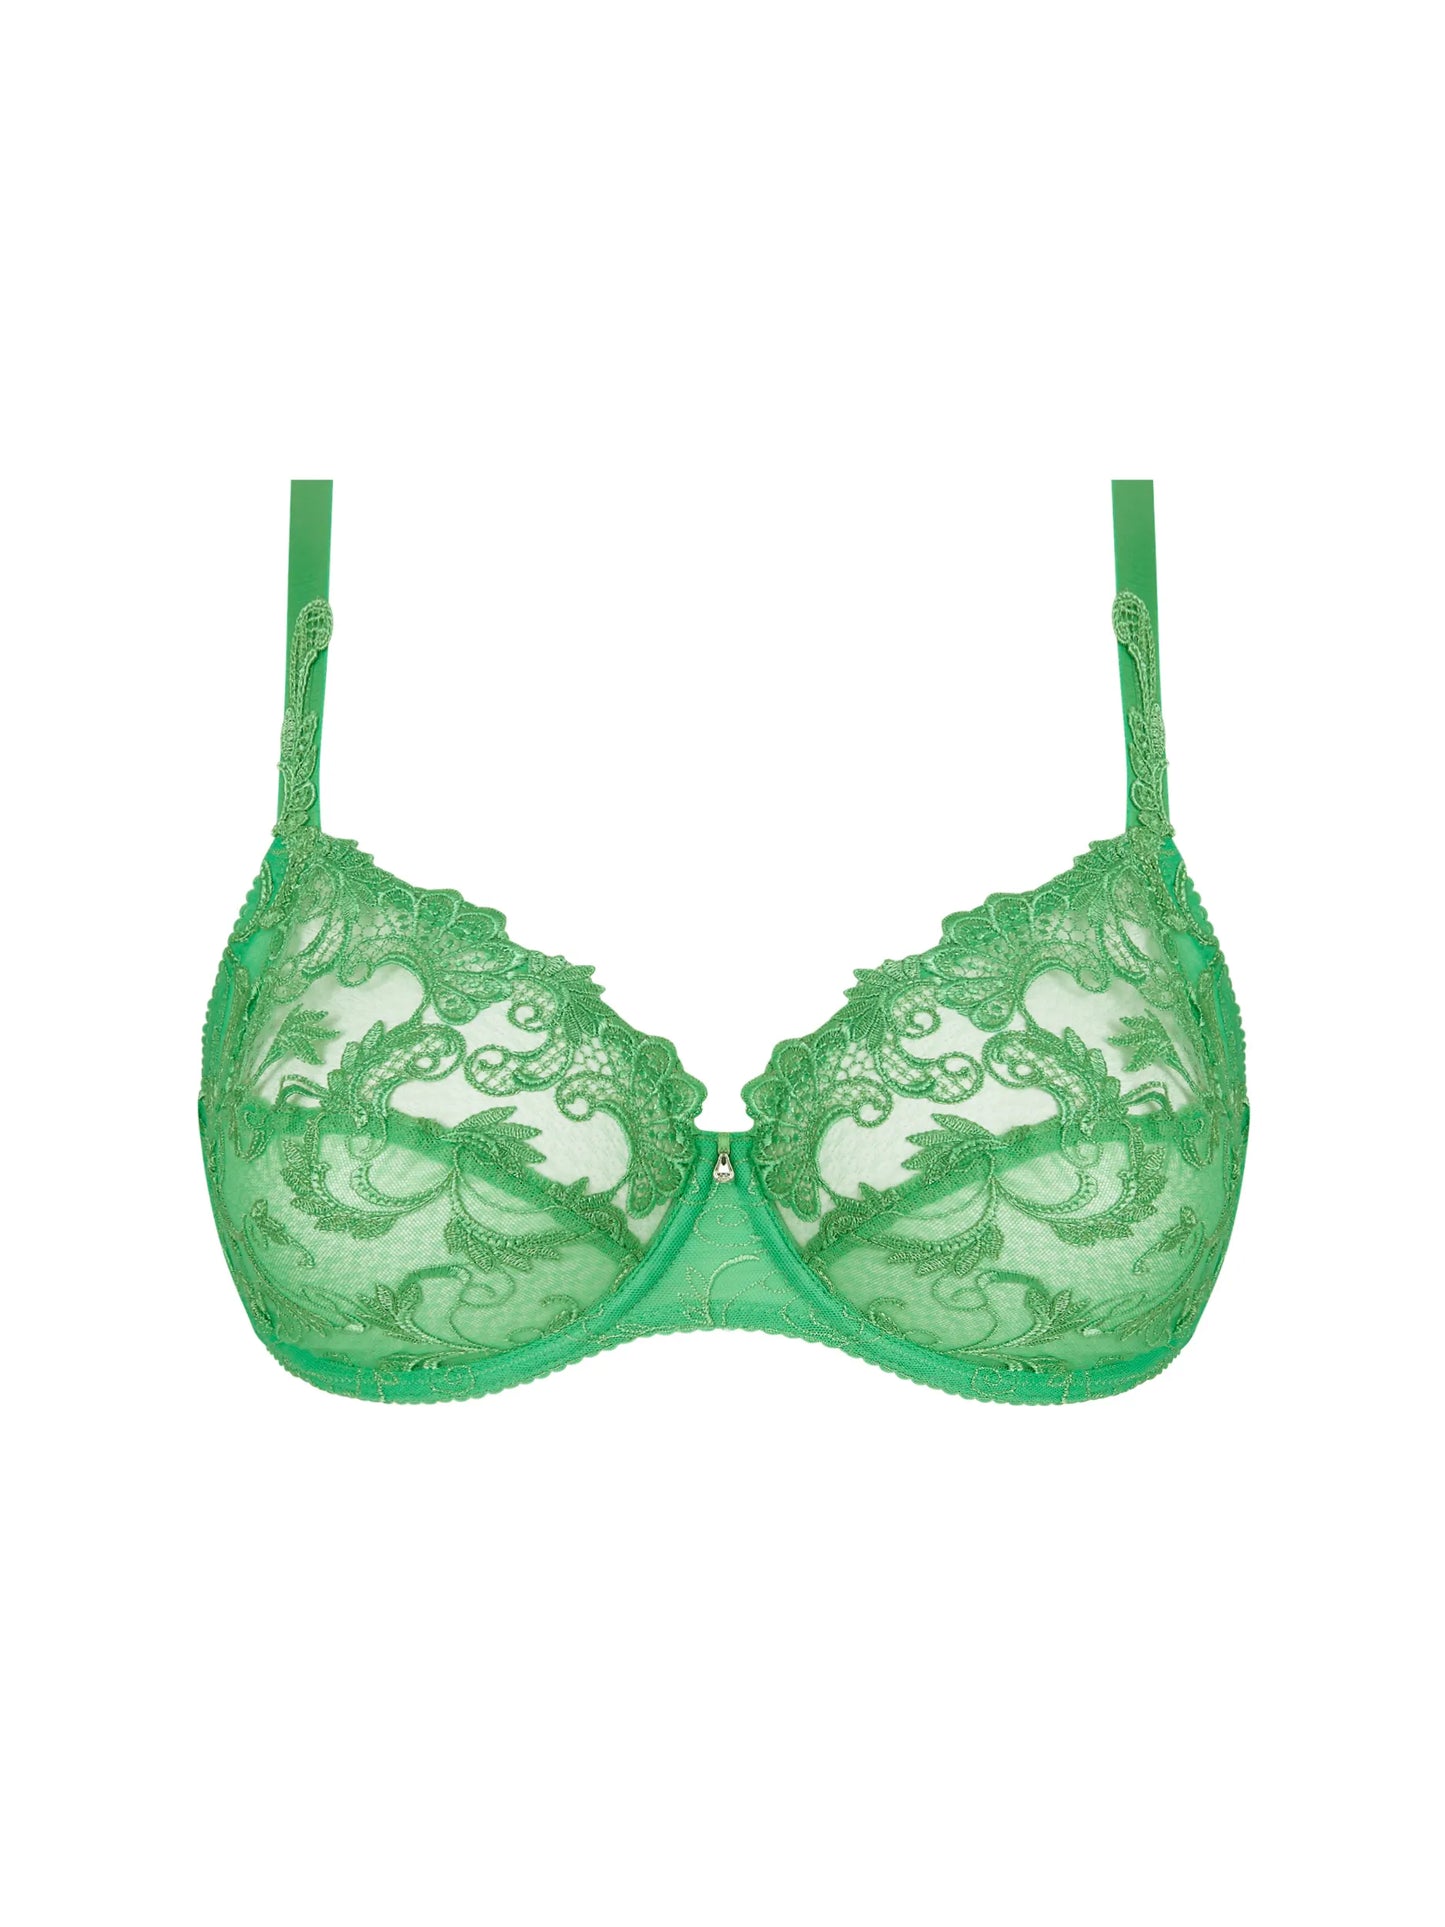 Dressing Floral in "Emeraude" 3 Parts Full Cup Bra By Lise Charmel - 32-44 D-G (EURO/US)